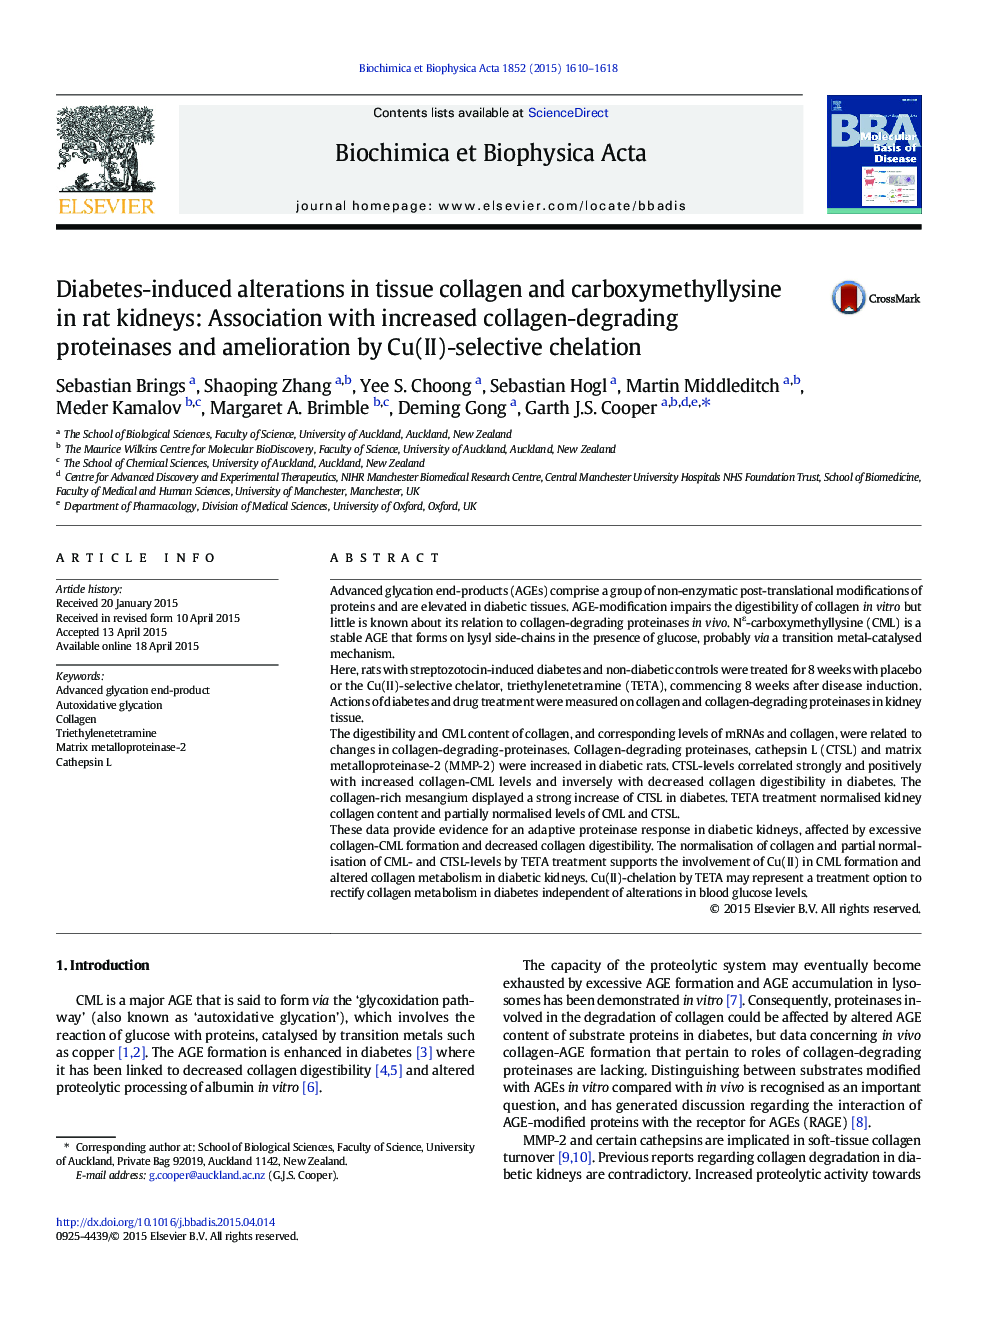 Diabetes-induced alterations in tissue collagen and carboxymethyllysine in rat kidneys: Association with increased collagen-degrading proteinases and amelioration by Cu(II)-selective chelation